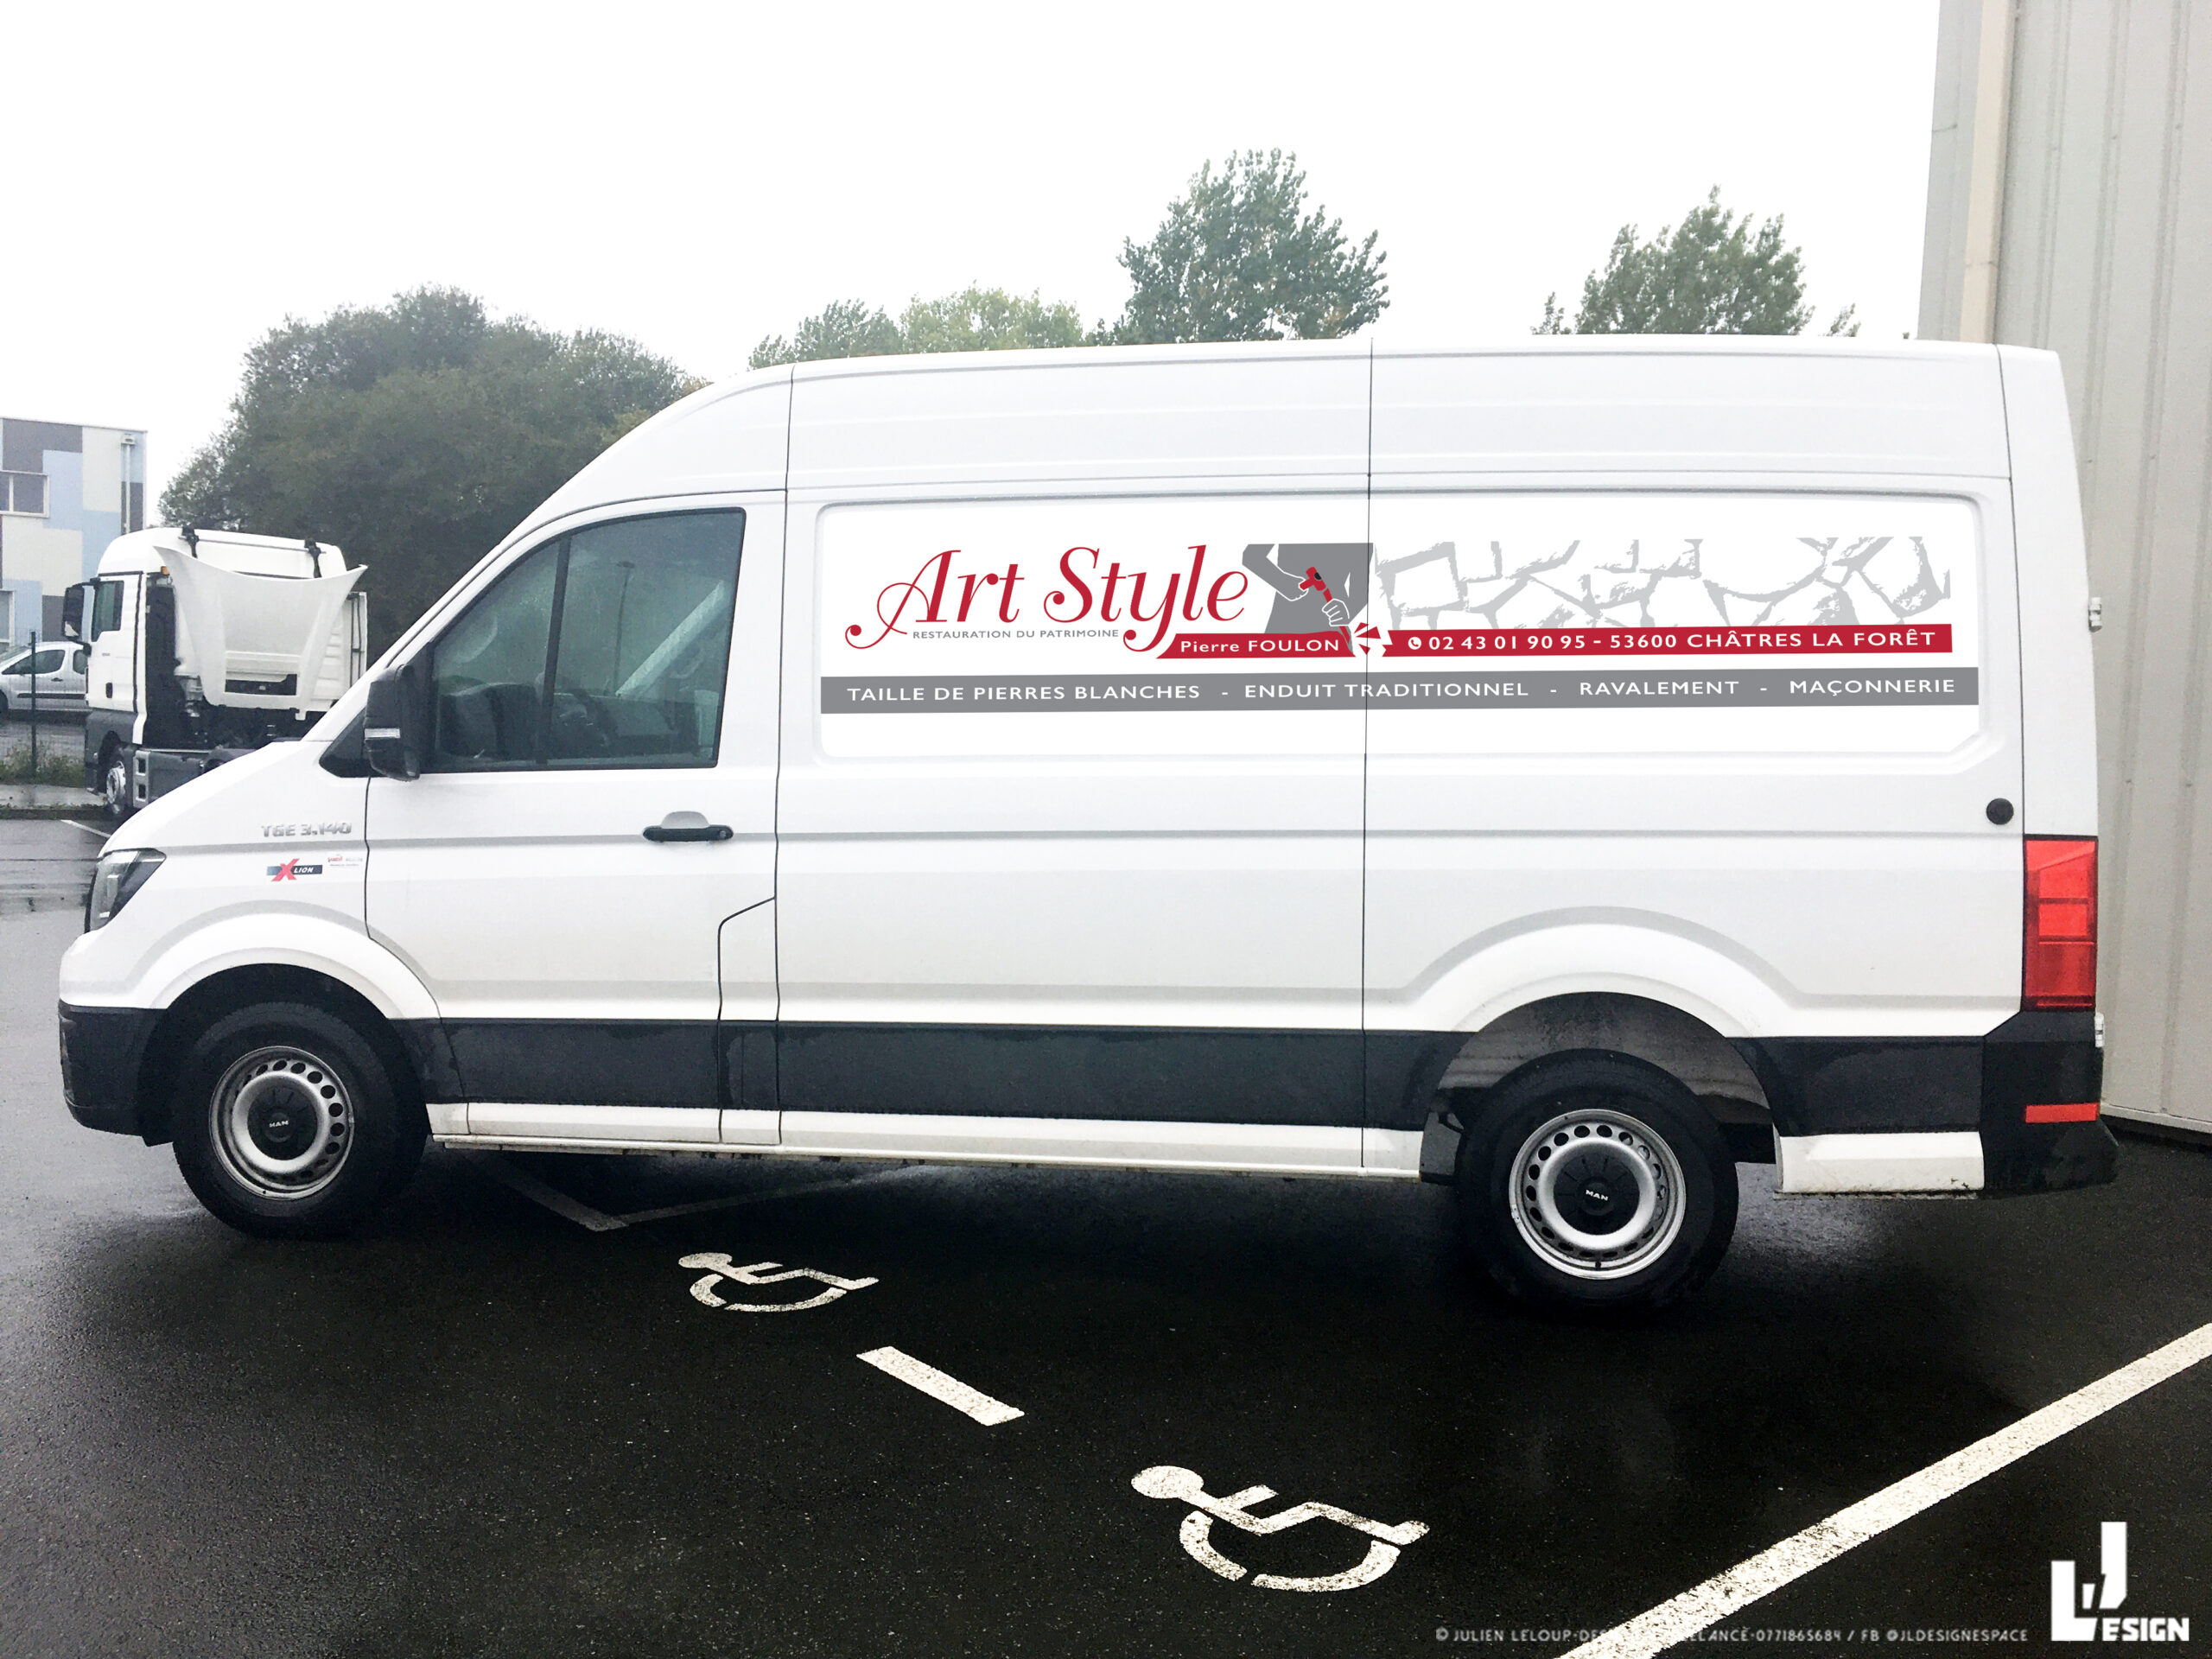 Covering Camion Art'Style